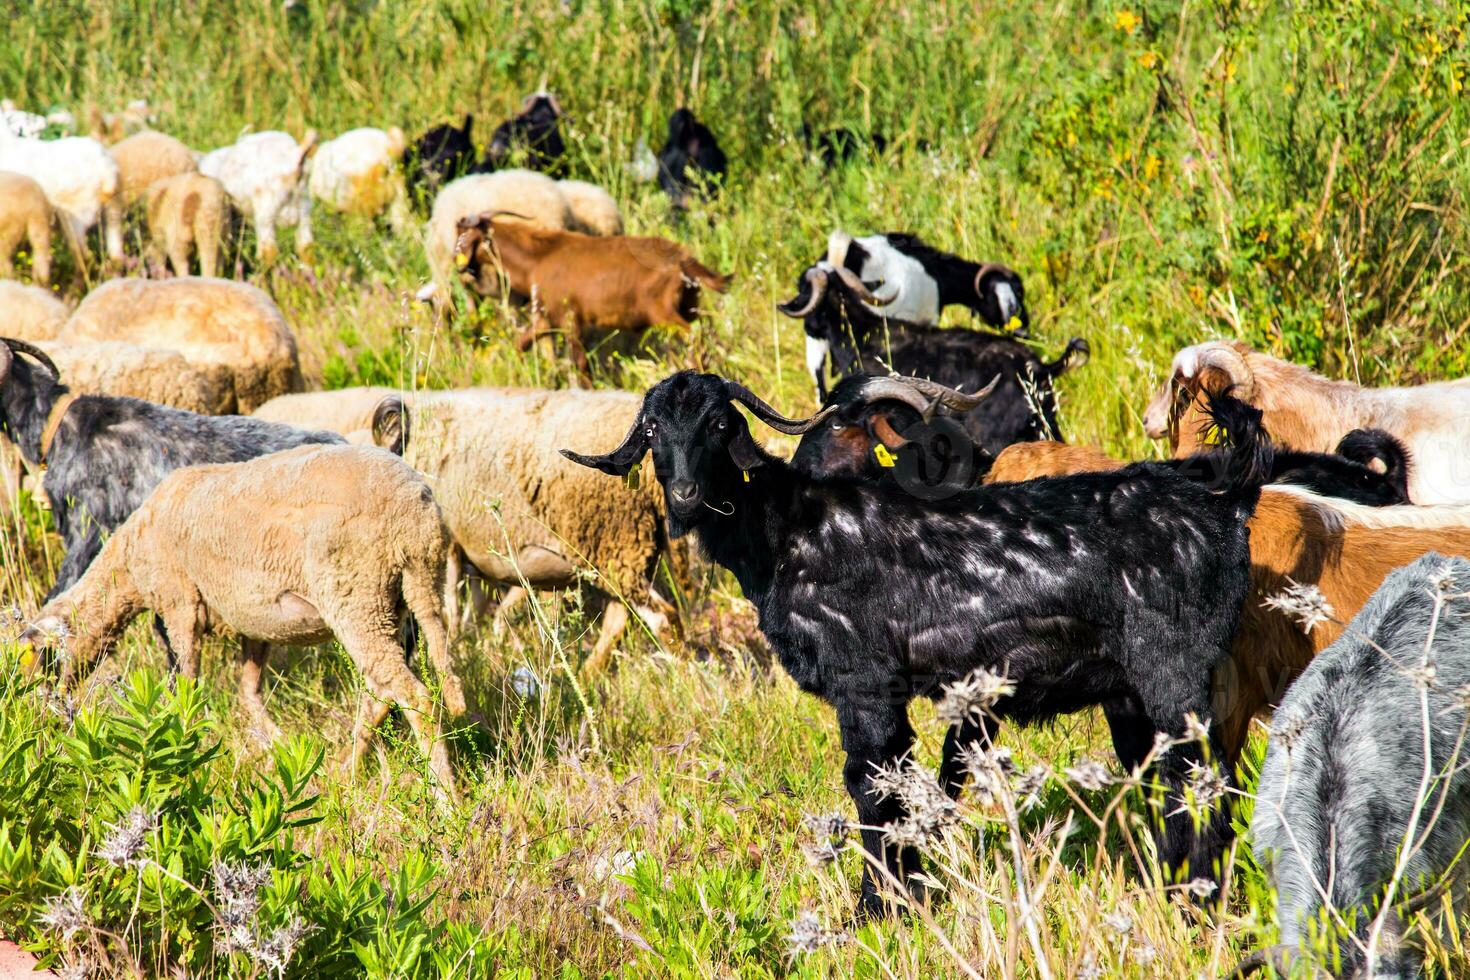 Turkey livestock, sheep and cattle on a farm photo